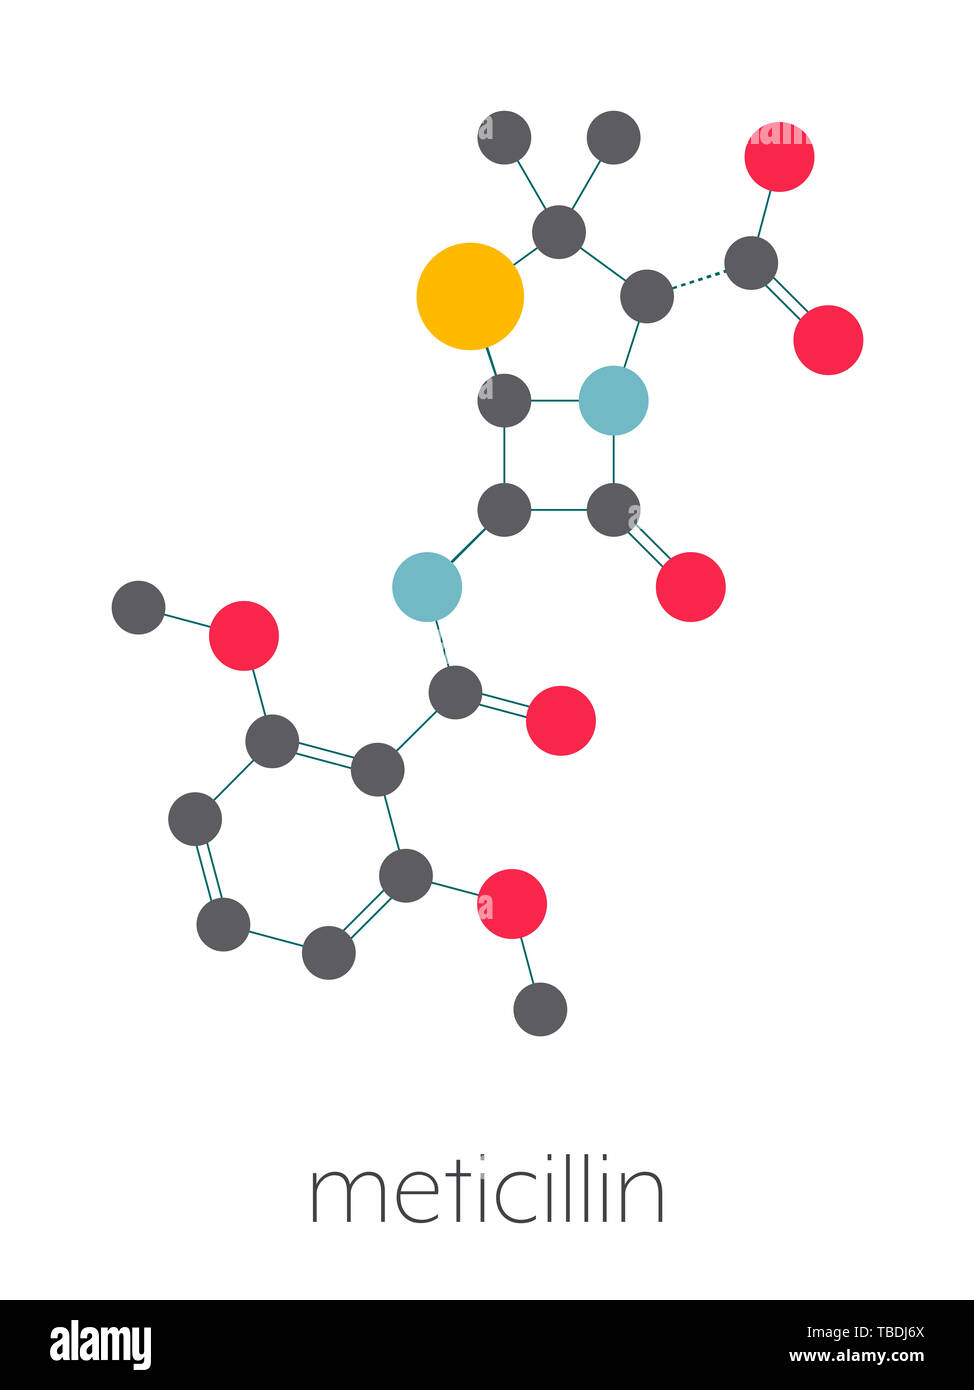 Meticillin antibiotic drug (beta-lactam class) molecule. MRSA stands for Methicillin-resistant staphylococcus aureus. Stylized skeletal formula (chemical structure). Atoms are shown as color-coded circles connected by thin bonds, on a white background: hydrogen (hidden), carbon (grey), nitrogen (blue), oxygen (red), sulfur (yellow). Stock Photo